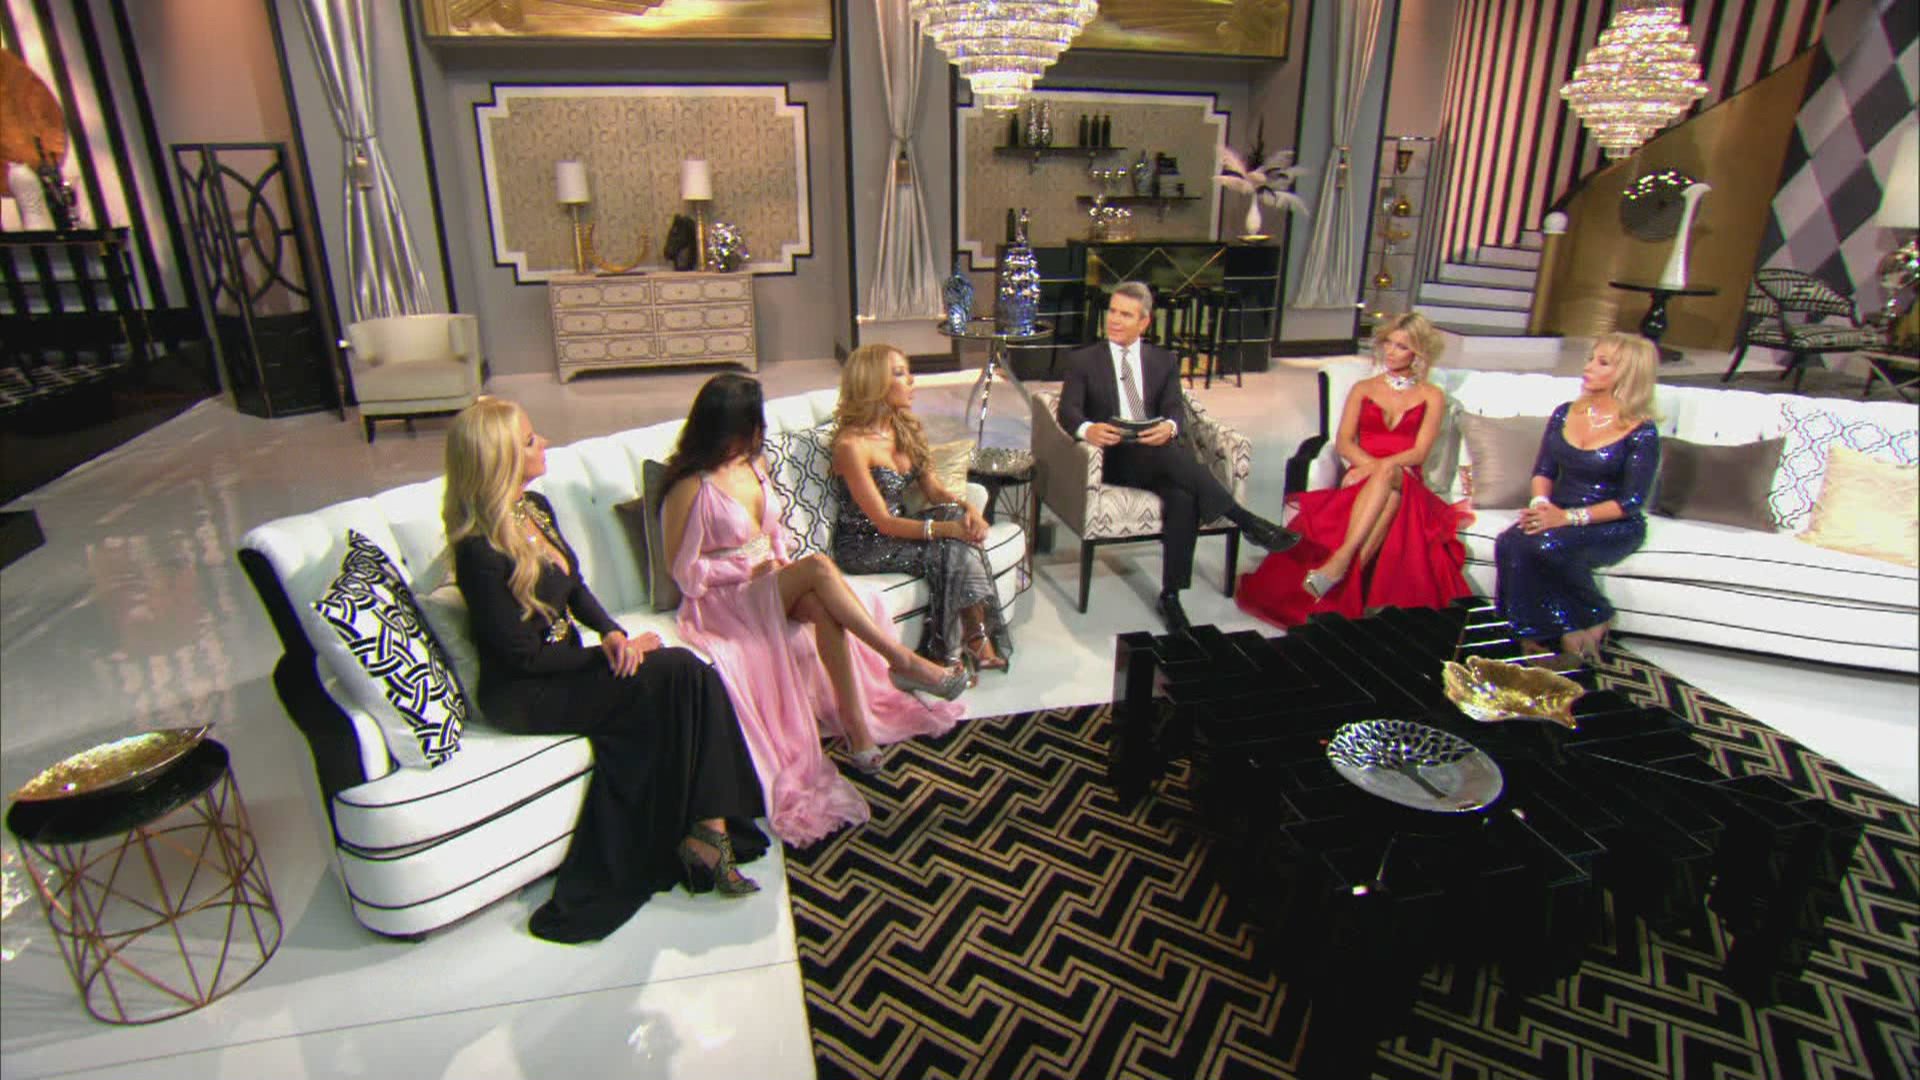 Watch The Real Housewives of Miami Episode Reunion Part 2